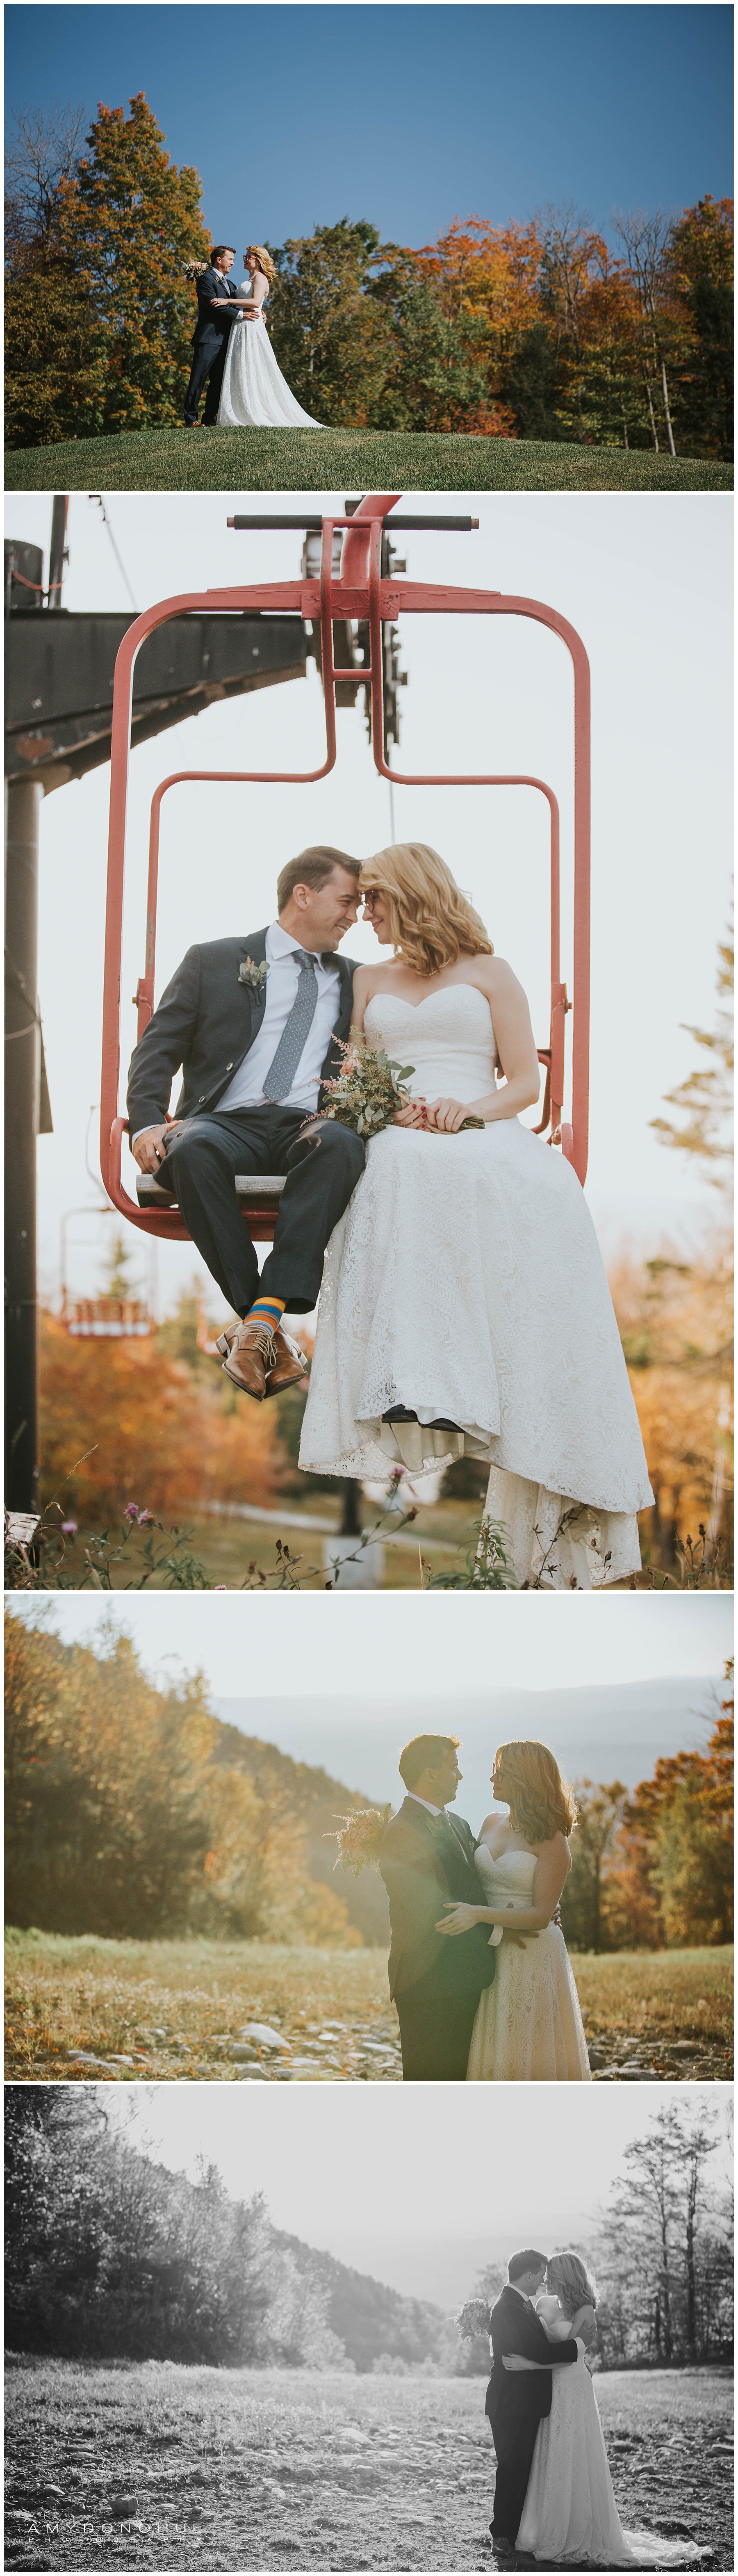 Just Married Portraits | Vermont Wedding Photographer | © Amy Donohue Photography